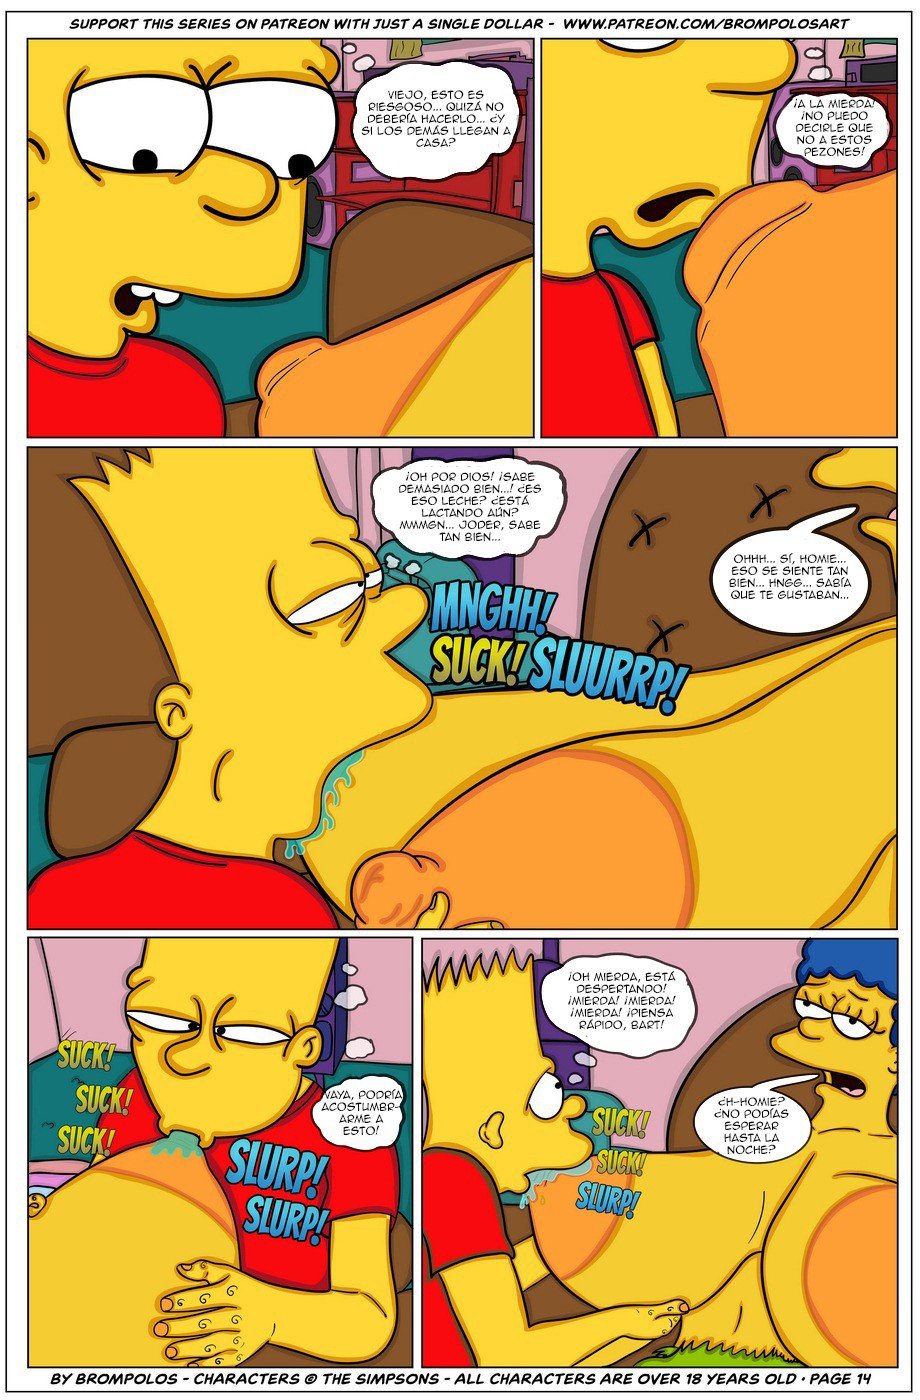 The Simpsons are The Sexenteins - 16